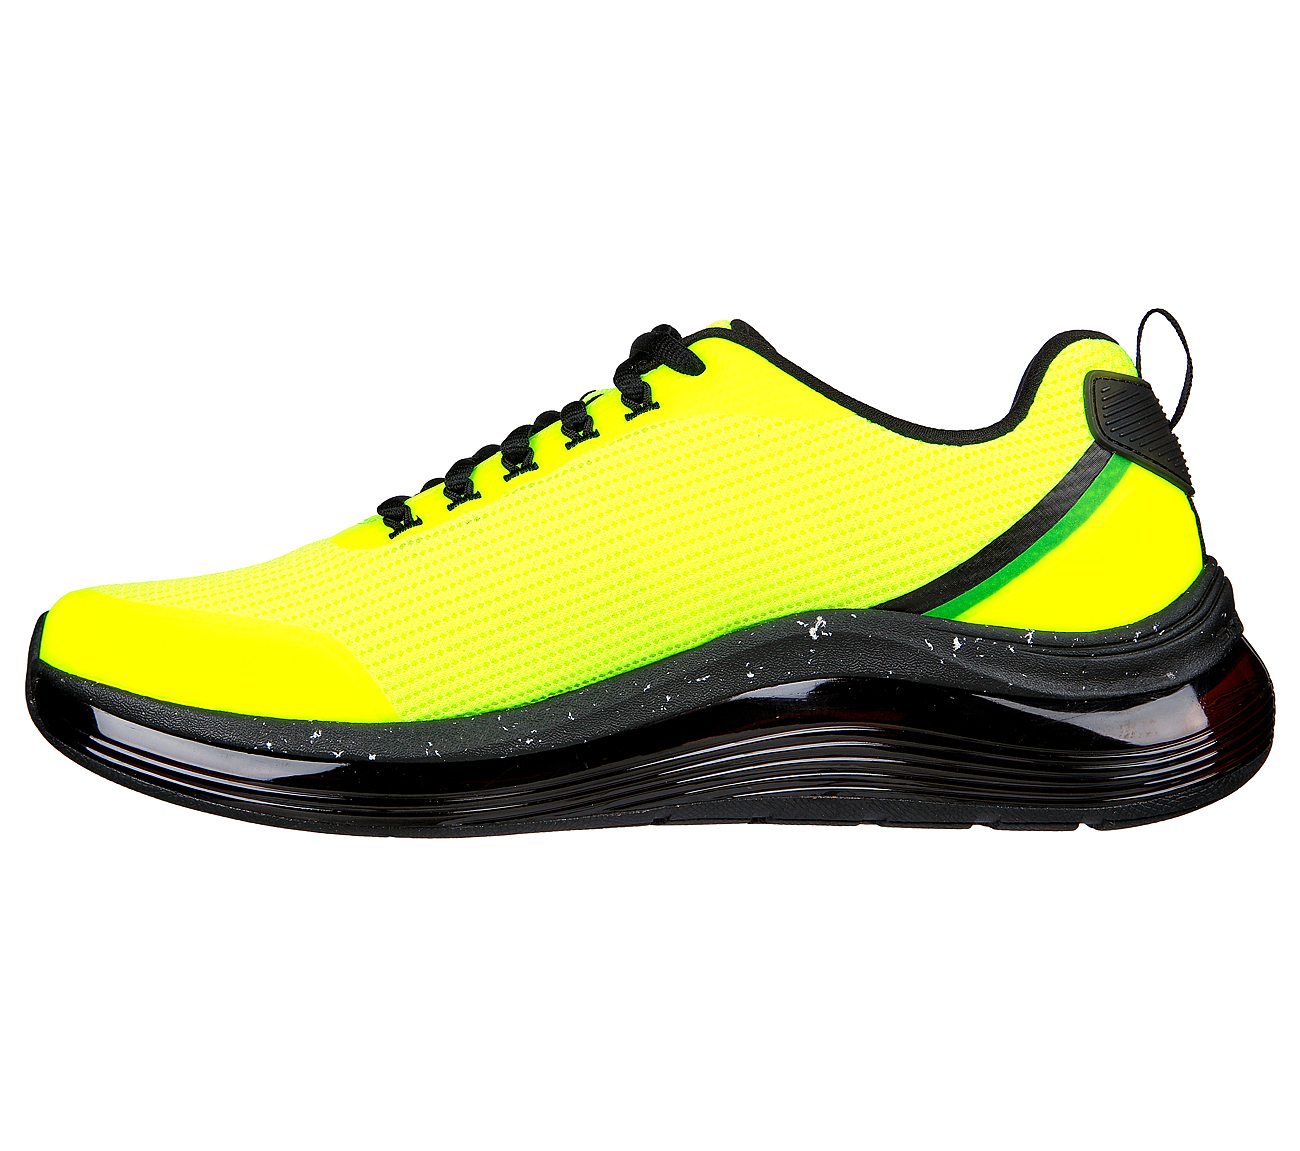 ARCH FIT ELEMENT AIR, LIME/BLACK Footwear Left View